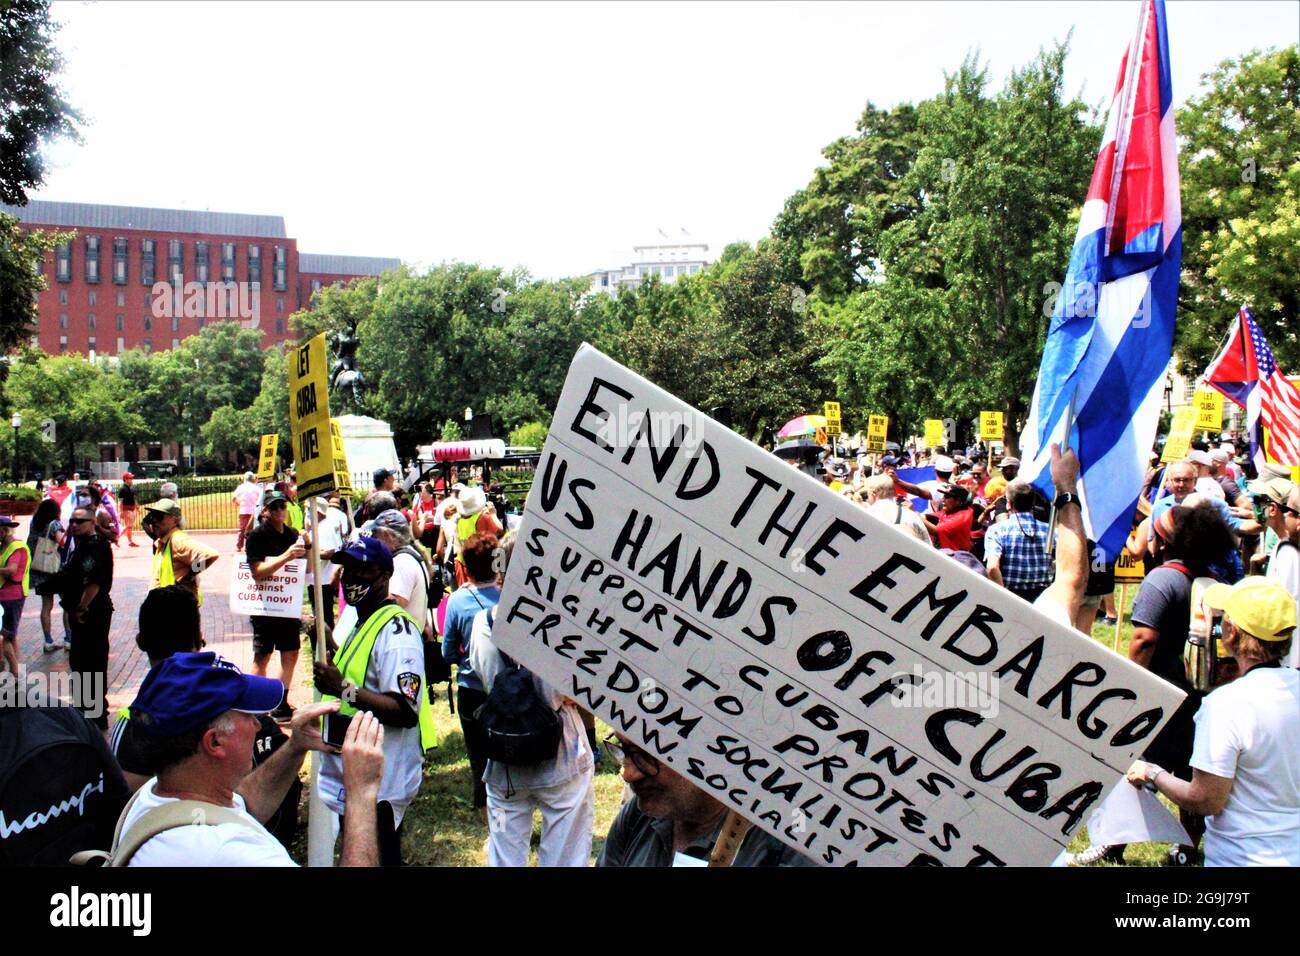 July 25th 2021-Washington, DC. USA - End the Embargo Protest's outside the Whitehouse call on President Biden and the U.S. to lift the embargo on Cuba Now!  Also members of the group Code Pink and one of it's founders Medea Benjamin who spoke at the rally were present as well. Credit Mark Apollo/Alamy Livenews Stock Photo